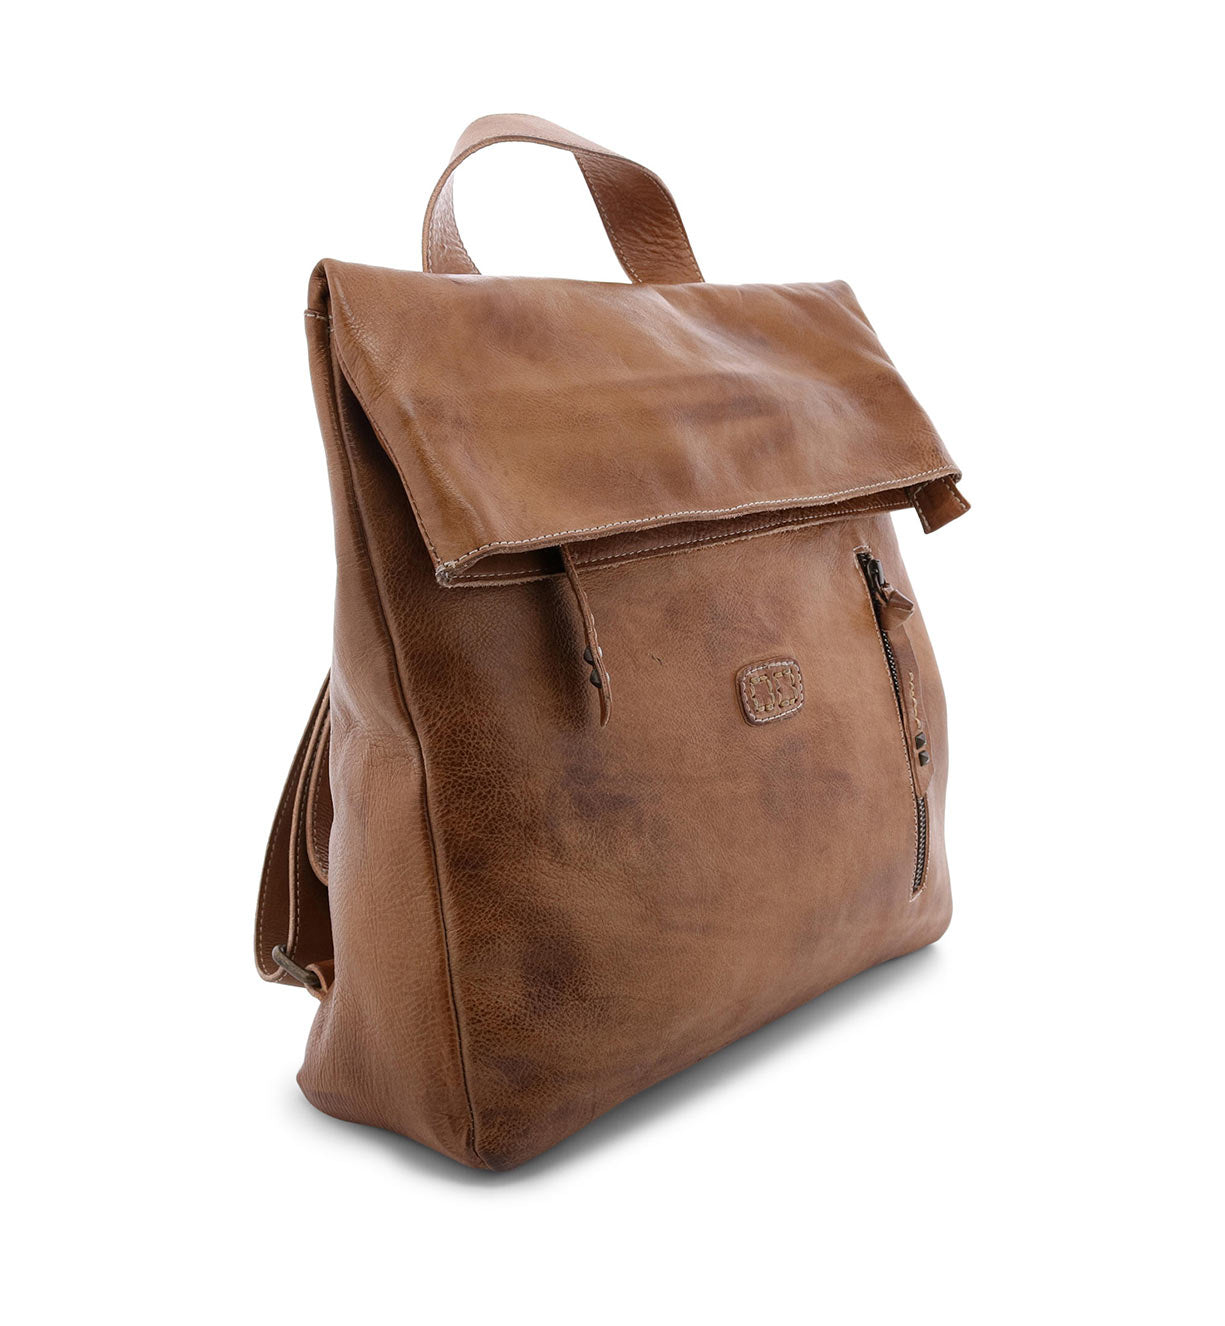 A tan Howie leather backpack by Bed Stu on a white background.